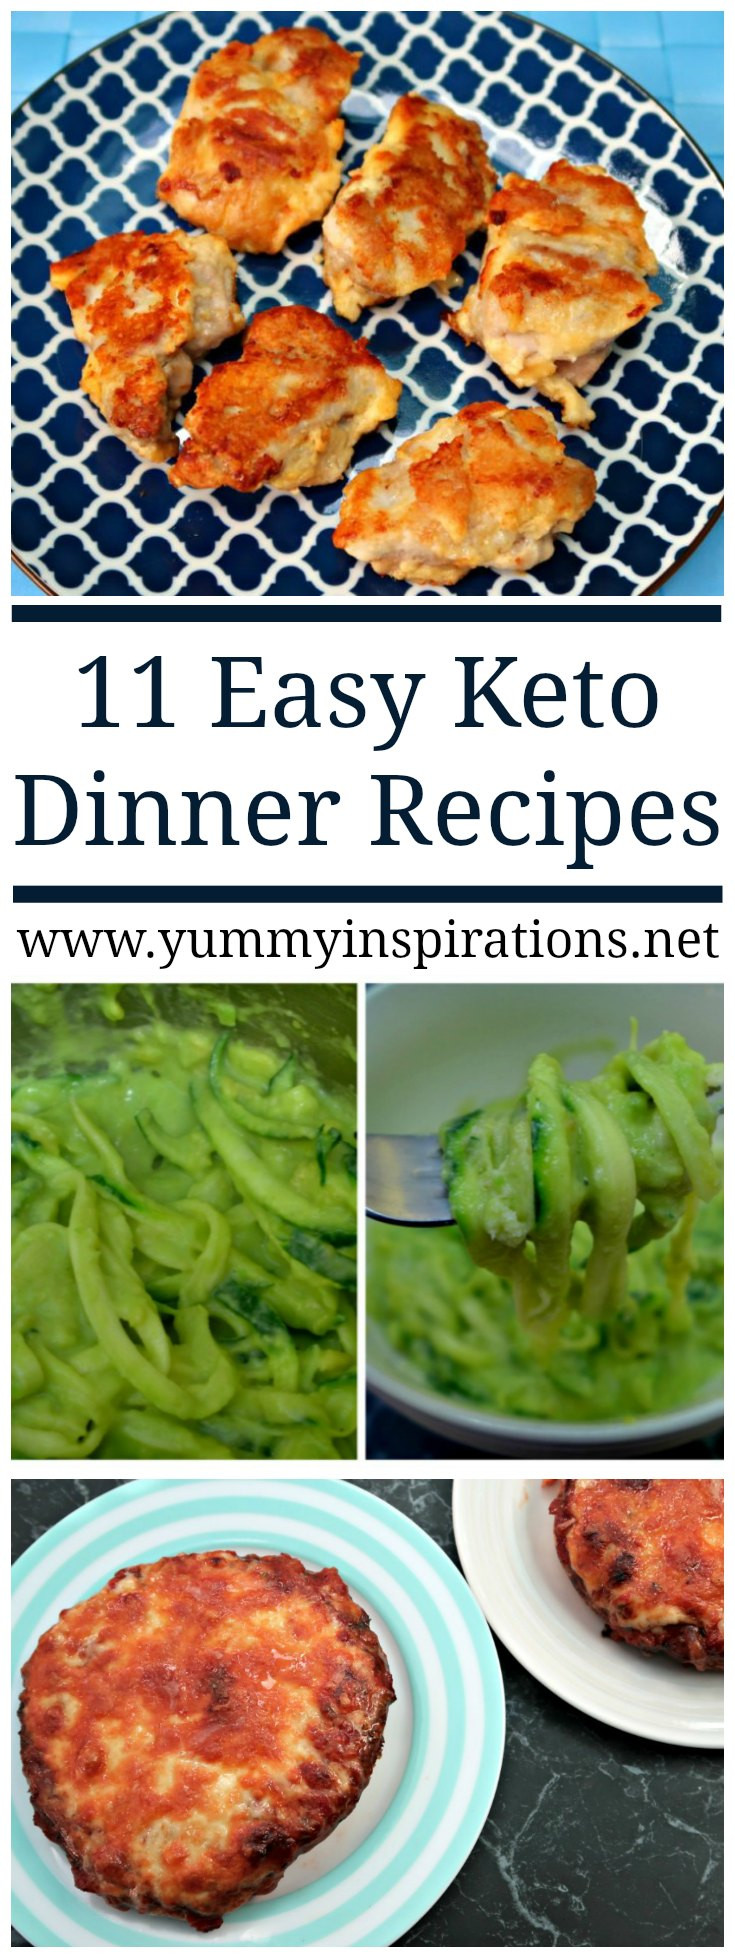 Family Friendly Keto Dinners
 11 Easy Keto Dinner Recipes Quick Low Carb Ketogenic